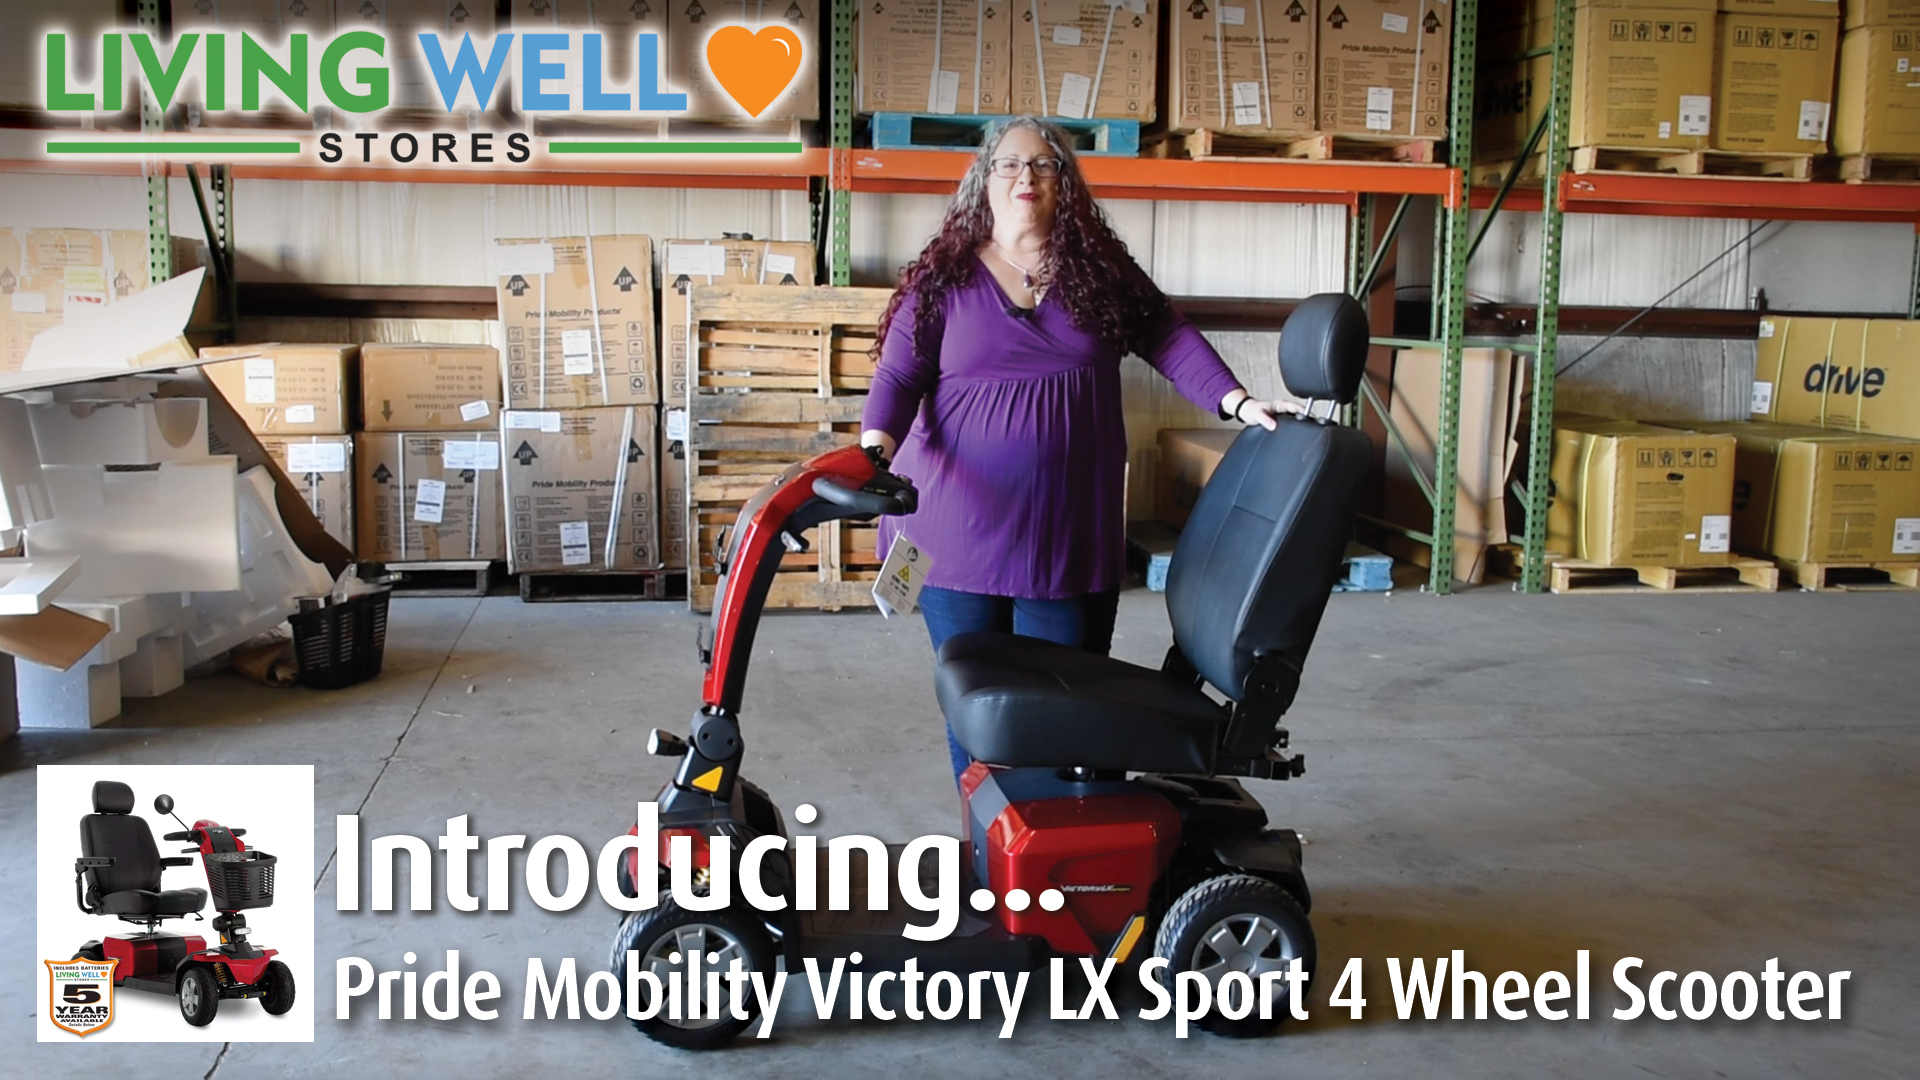 Introduction to the Pride Mobility Victory LX 4-Wheel Scooter